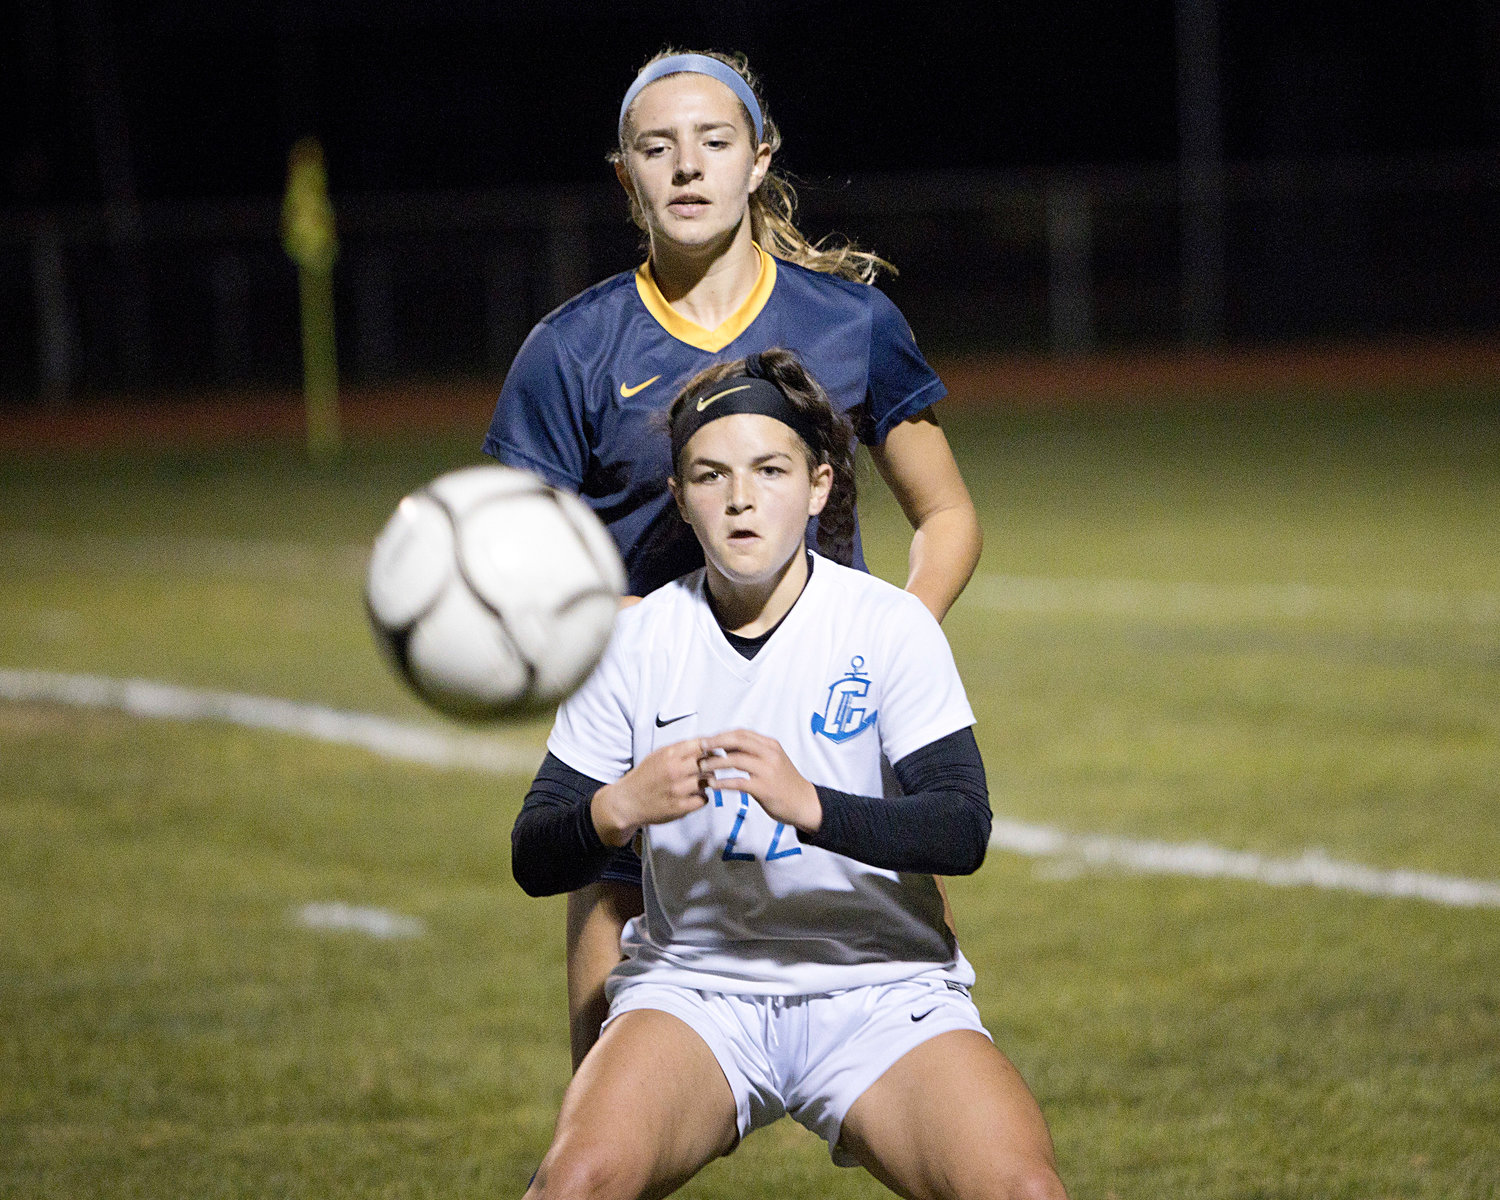 Mady Calhoun pressures a Cumberland opponent on a throw-in pass.